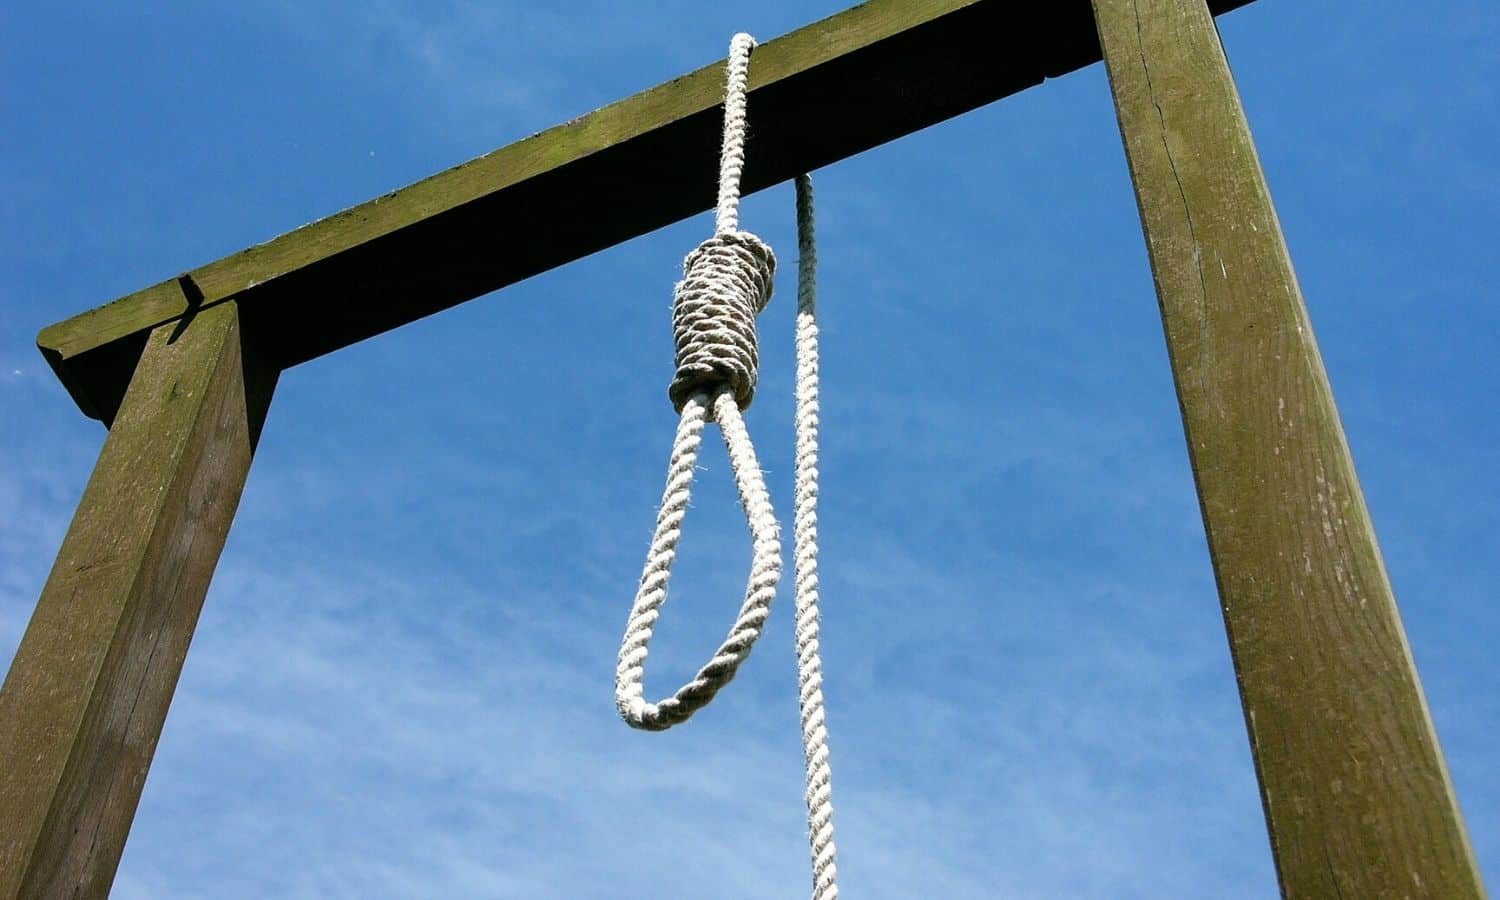 gallows noose knot